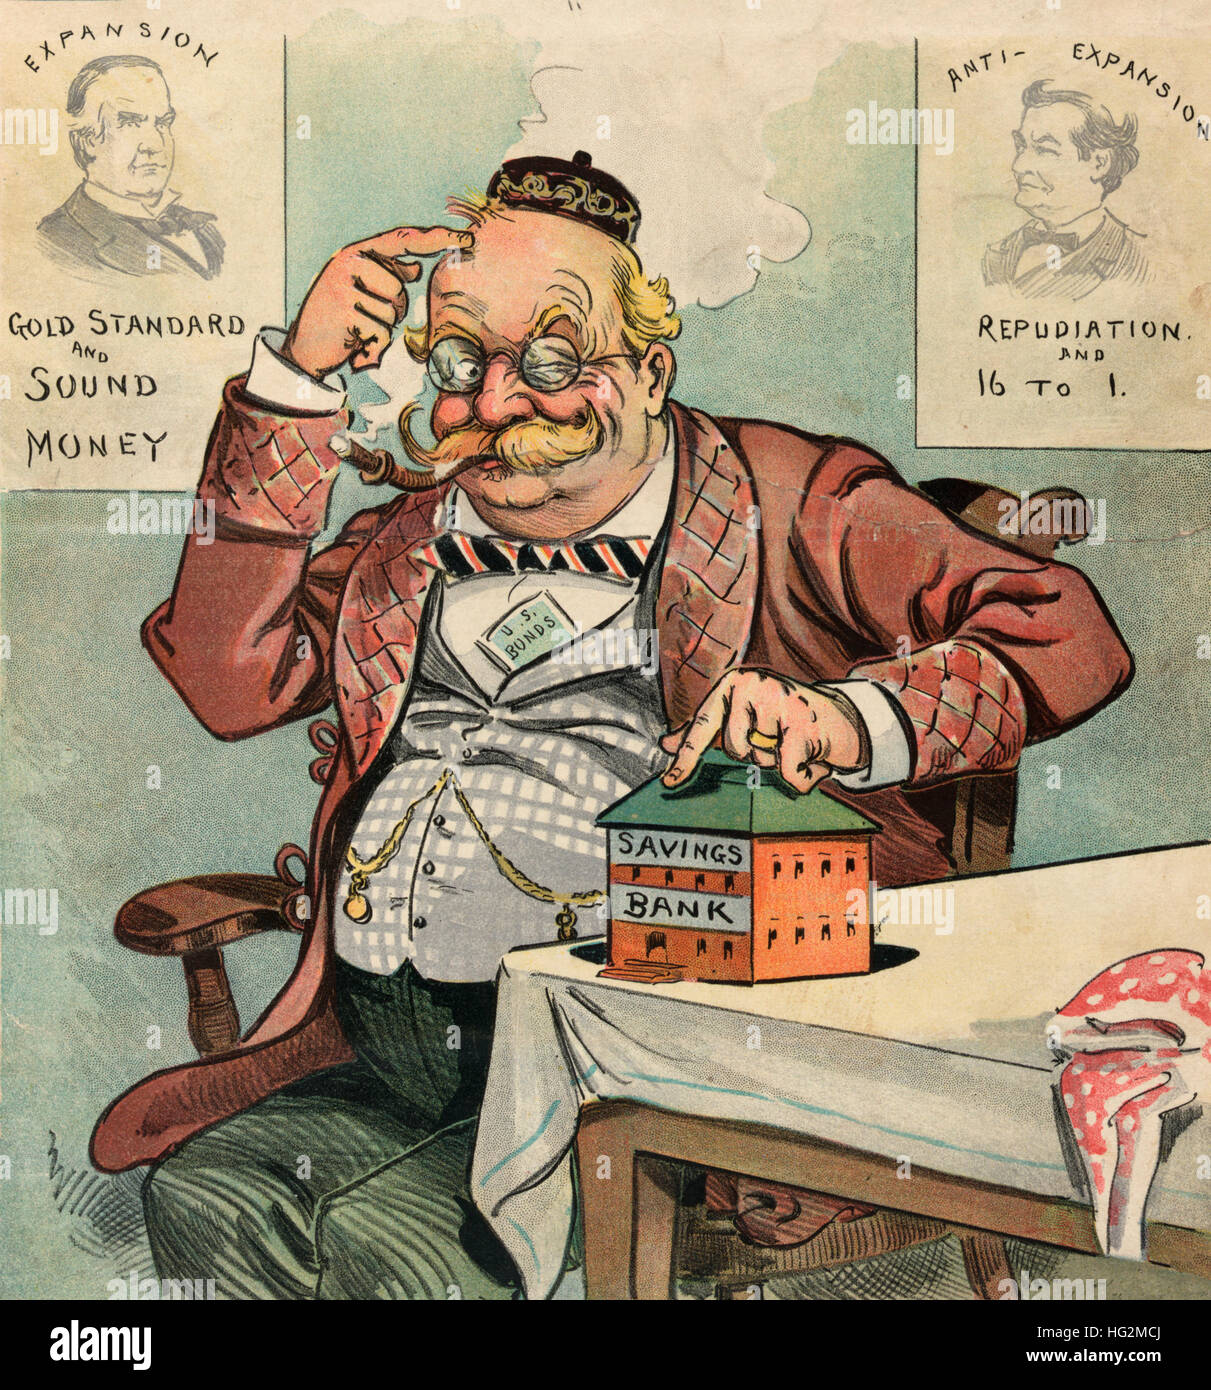 How will our German-American vote? - Illustration shows an elderly German American man with one hand pointing to his head and the other pointing to a coin bank labeled 'Savings Bank' on a table, he winks to reinforce that he thinks his investments in the 'U.S. Bonds' protruding from his vest, and his savings are wise decisions. On the left is a poster showing a bust portrait of President William McKinley labeled 'Expansion' and captioned 'Gold Standard and Sound Money', and on the right is a poster showing a bust portrait of William Jennings Bryan. 1900 Stock Photo